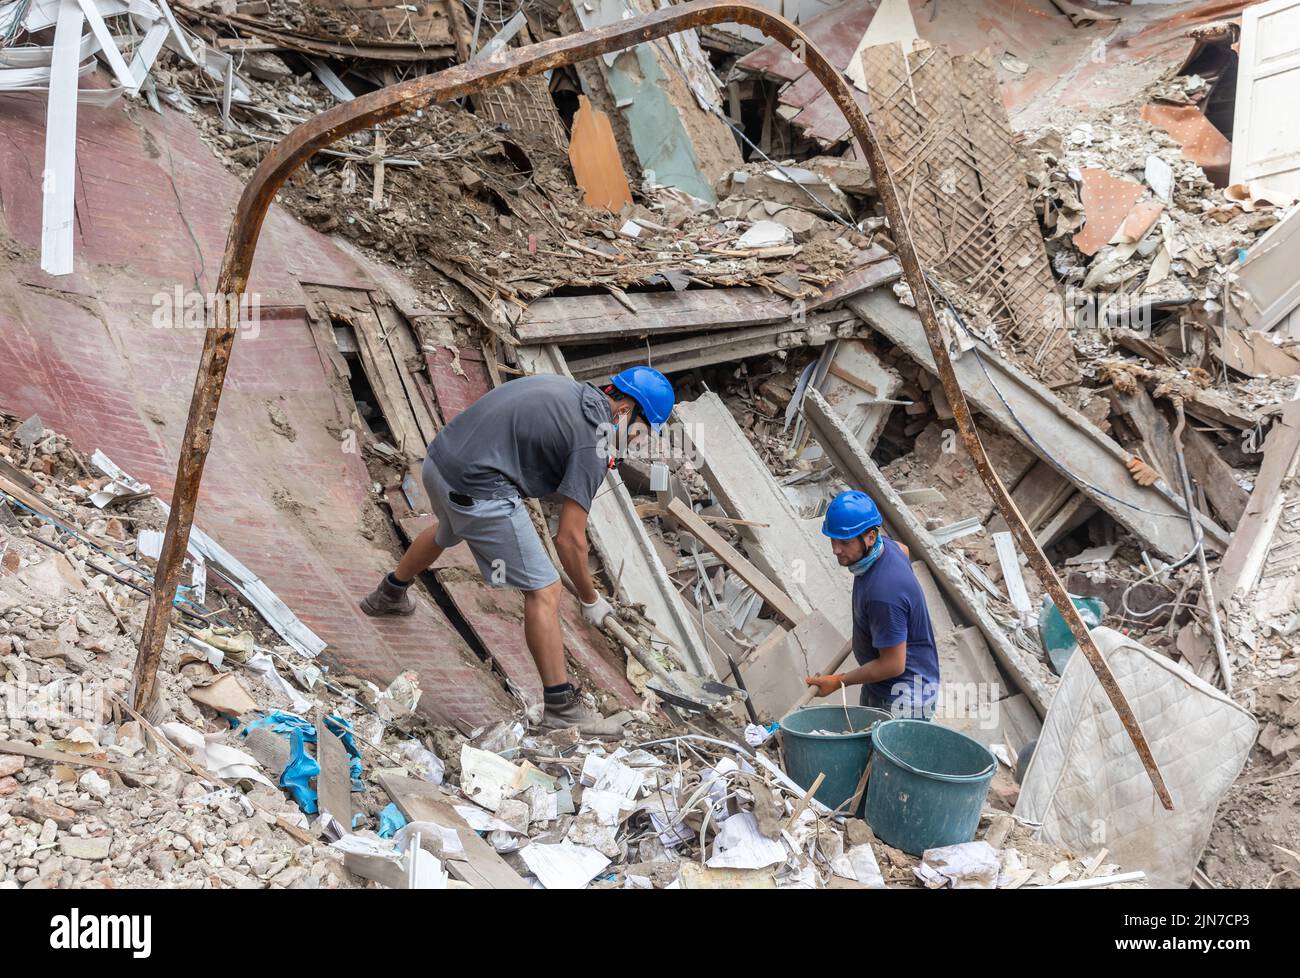 Volunteers clearing the rubble of a destroyed house as a result of the Russian shelling in the city of Kharkiv. Russia continues its invasion in Ukraine which started from February 24, 2022. (Photo by Mykhaylo Palinchak / SOPA Images/Sipa USA) Stock Photo